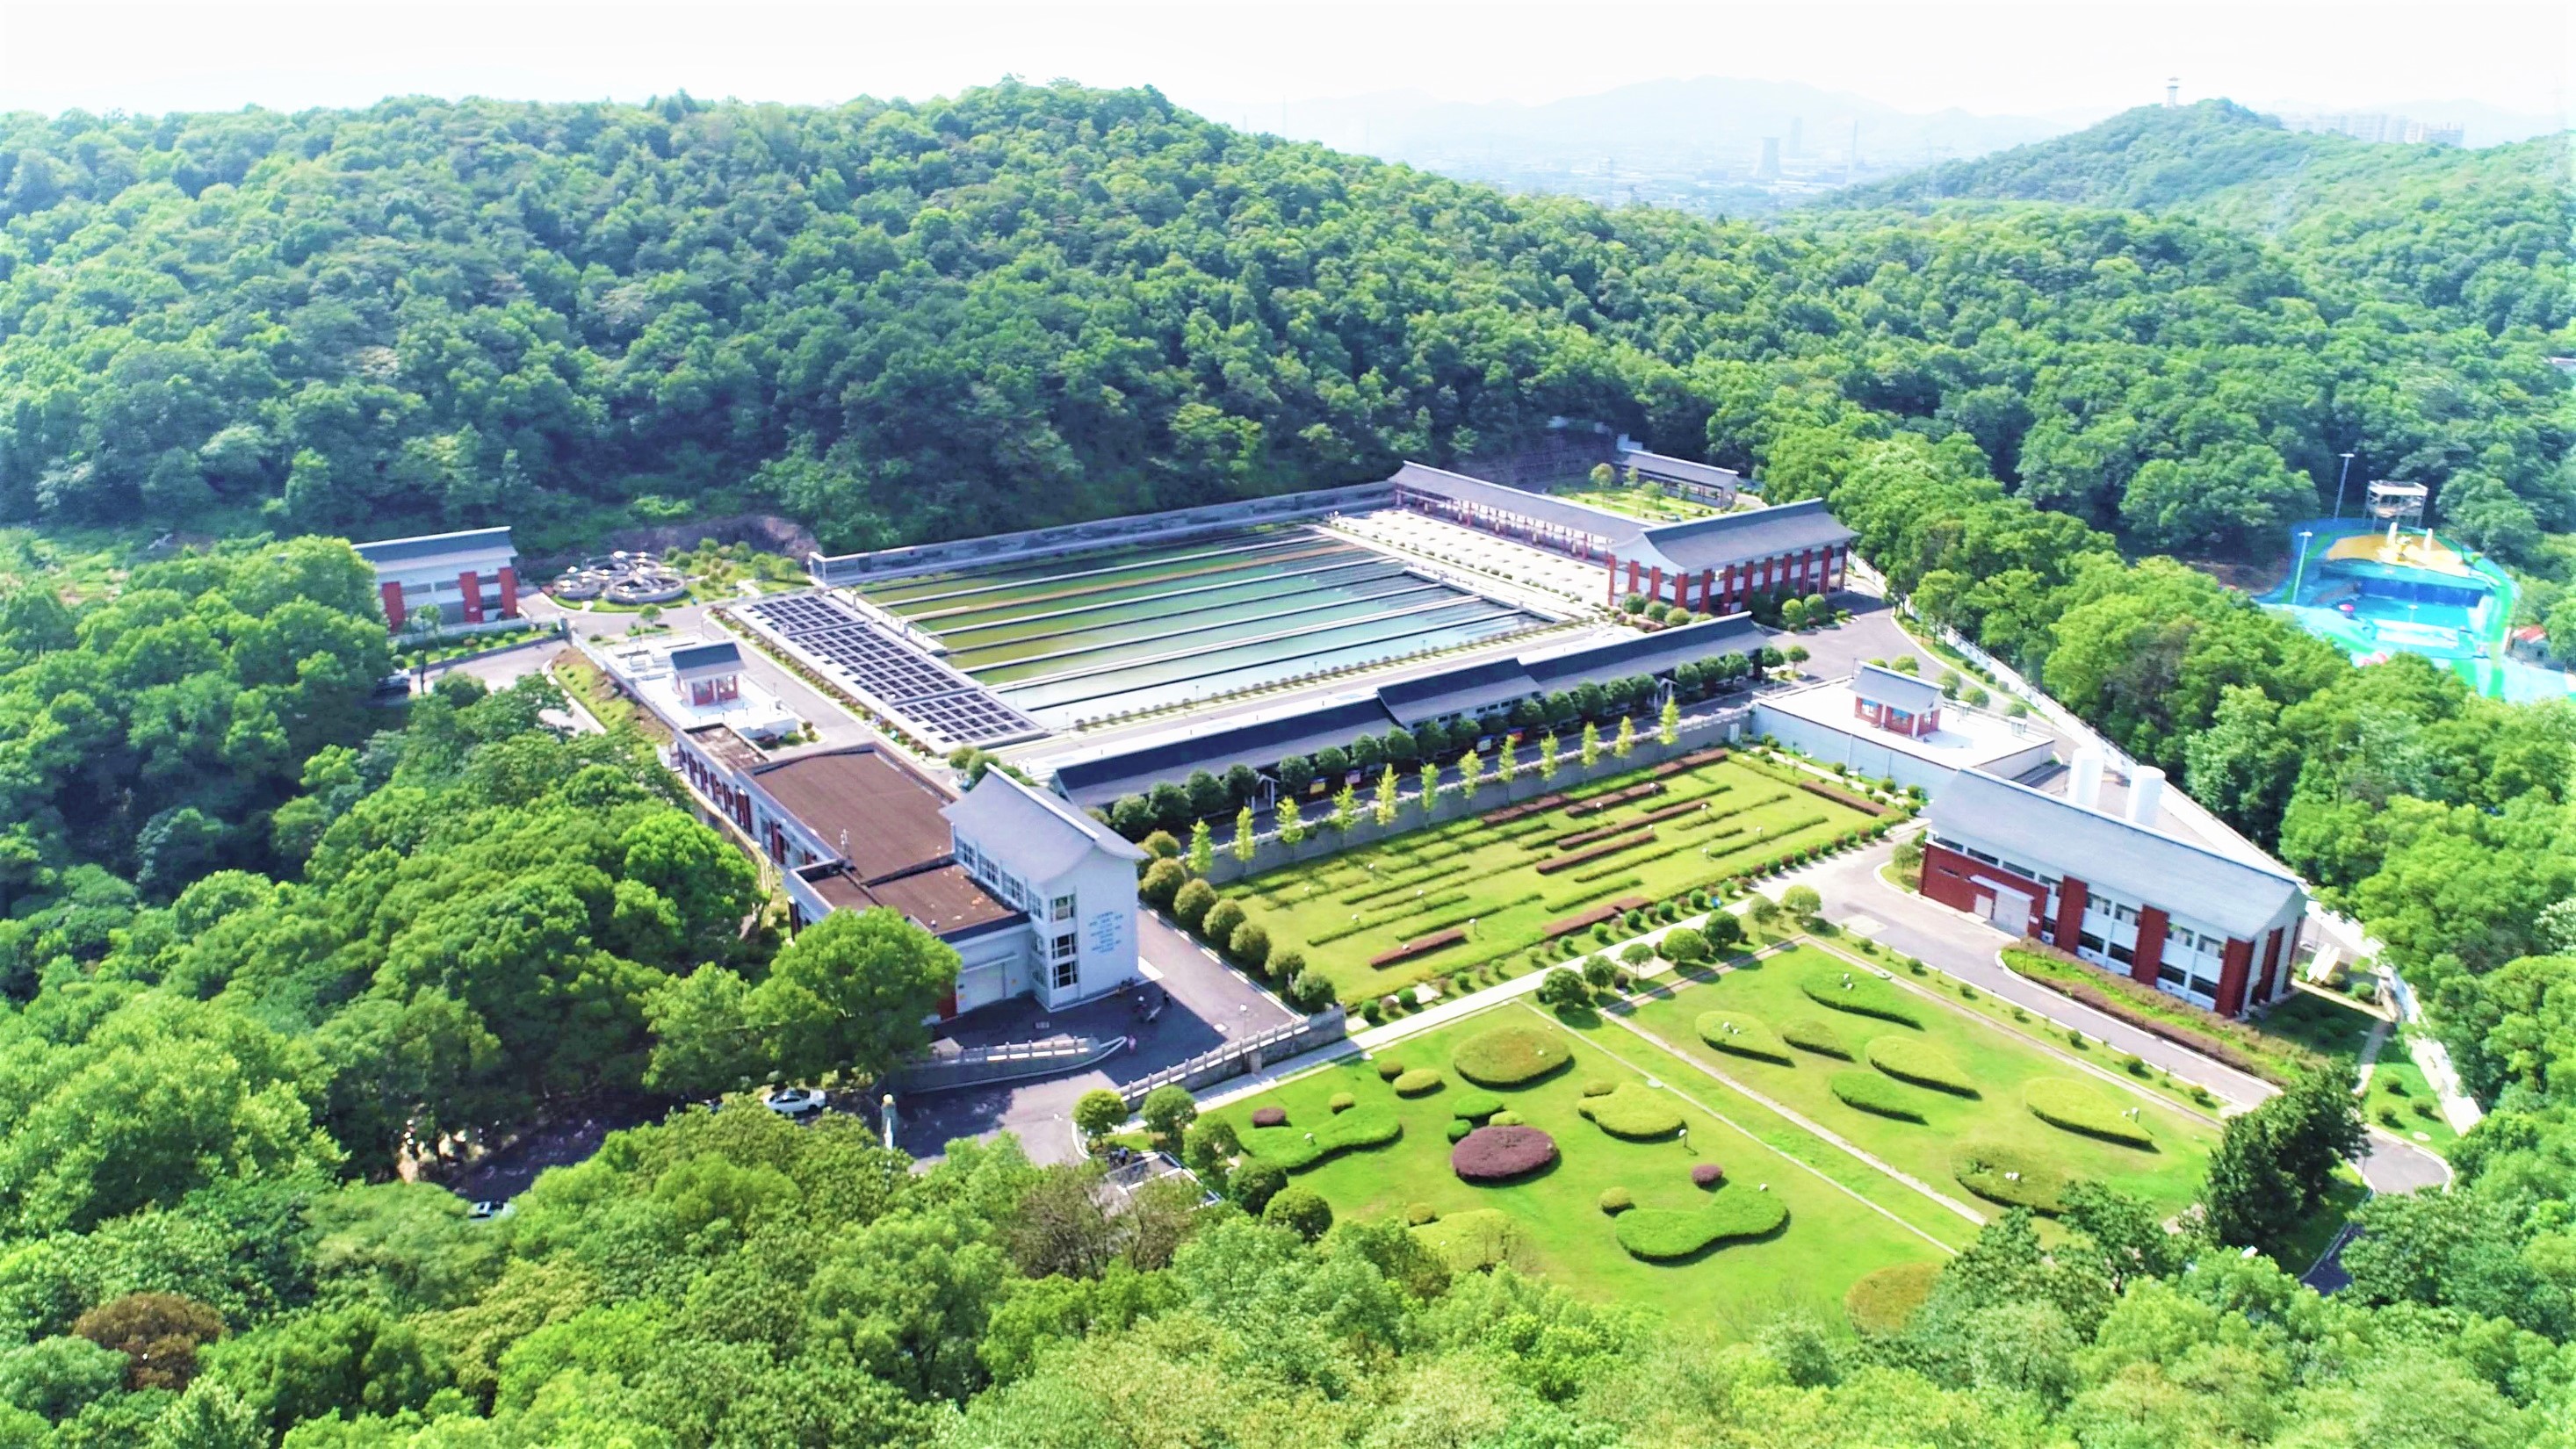 Upgrading Project of the Zhuzhou Second Water Plant(2018 National Quality Engineering Project)